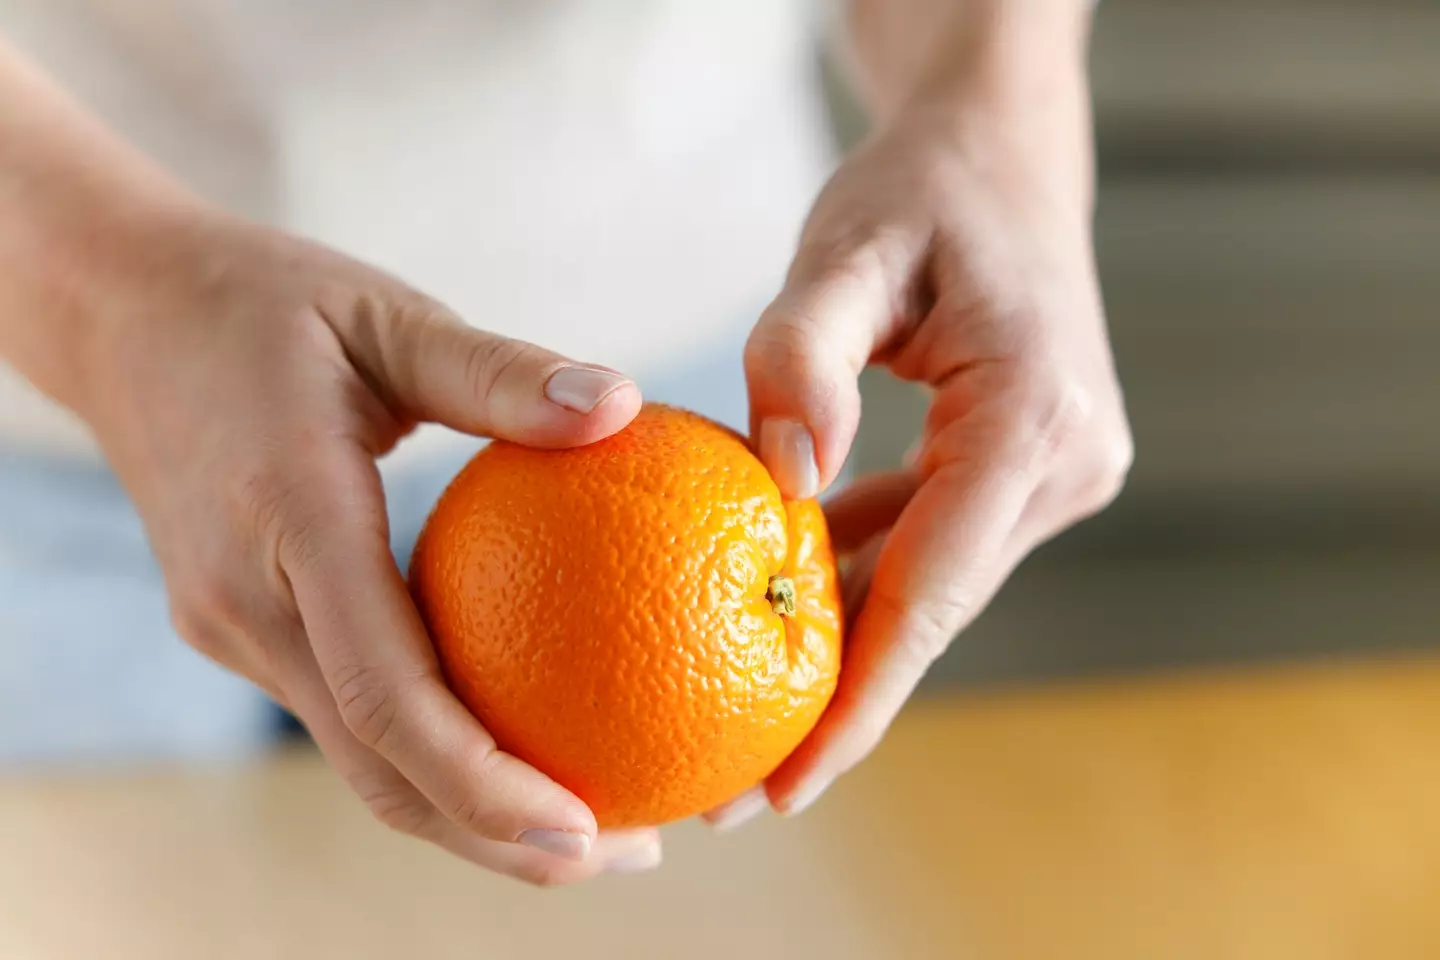 Would your partner pass the Orange Peel test?